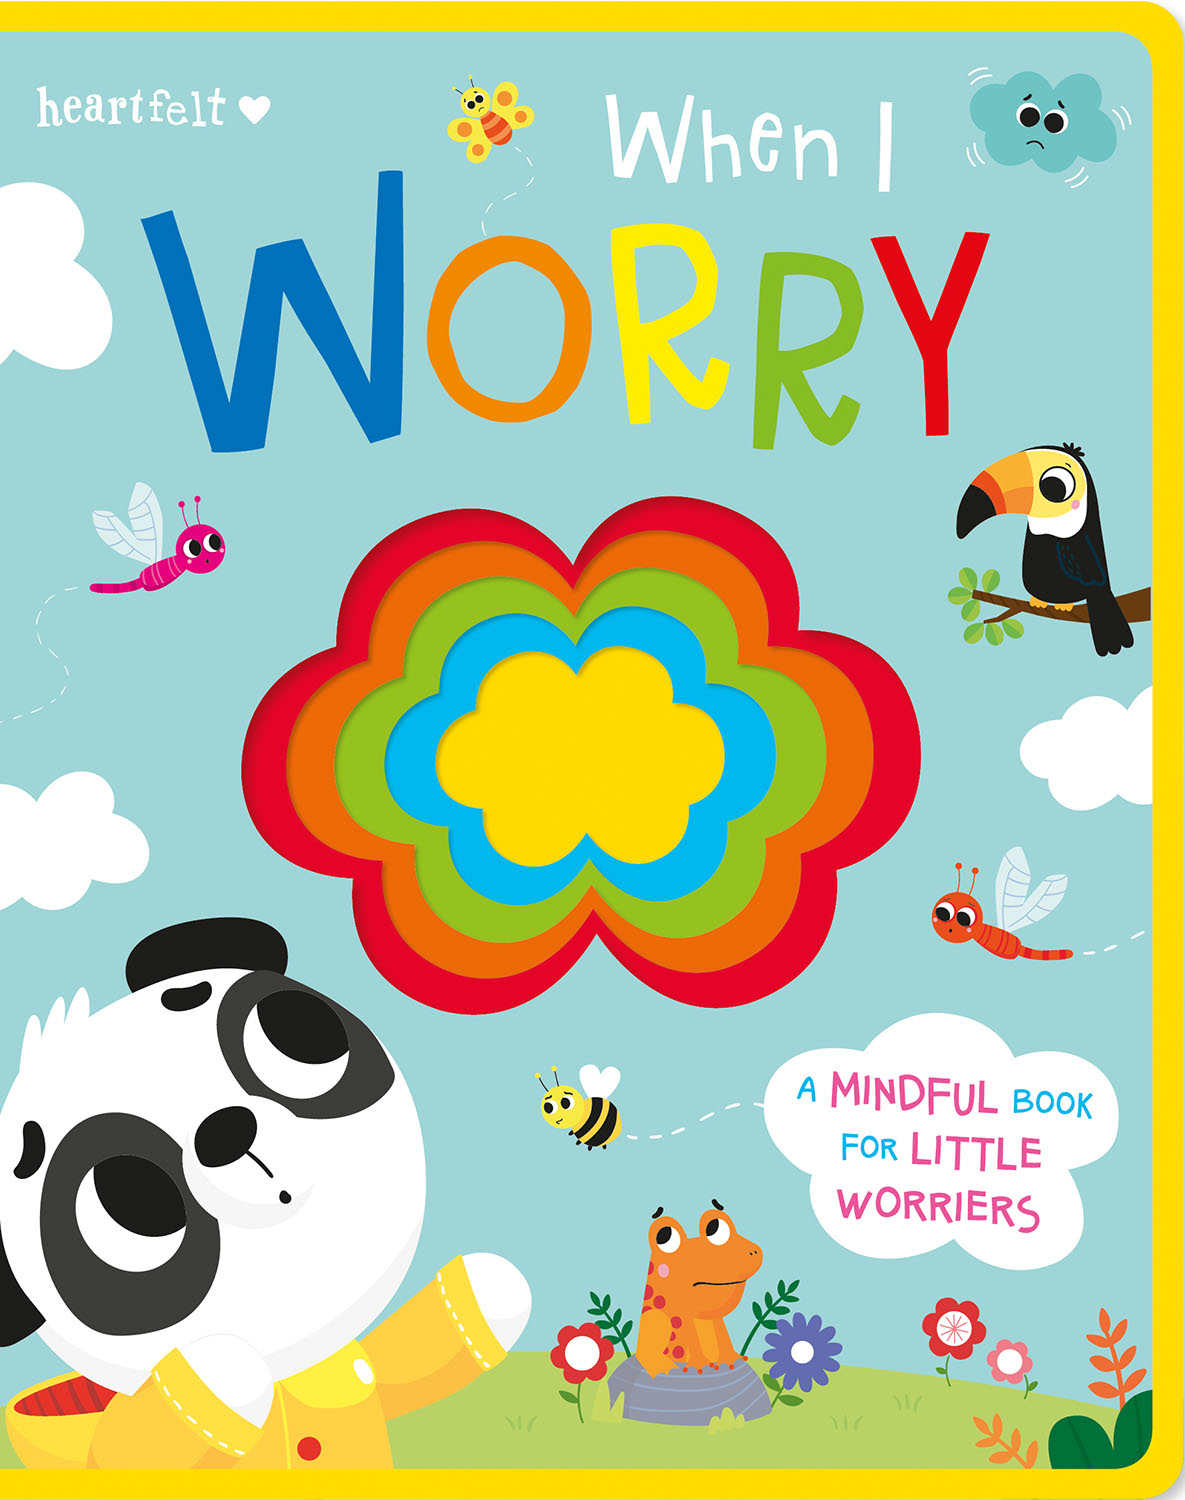 WHEN I WORRY